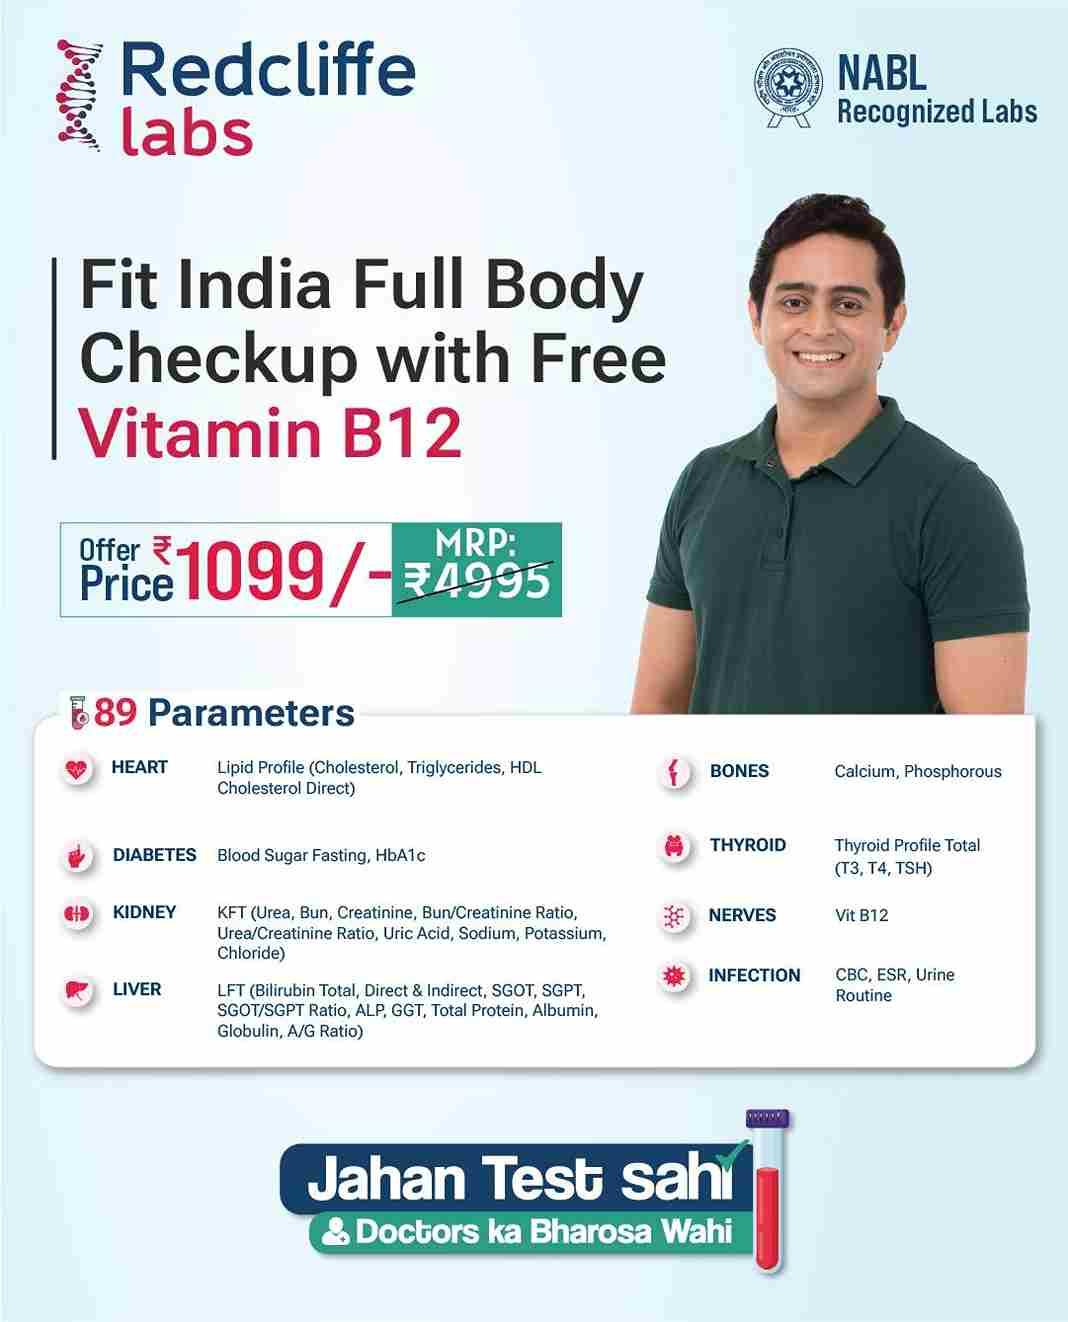 Fit India Full Body Checkup with Free Vitamin B12